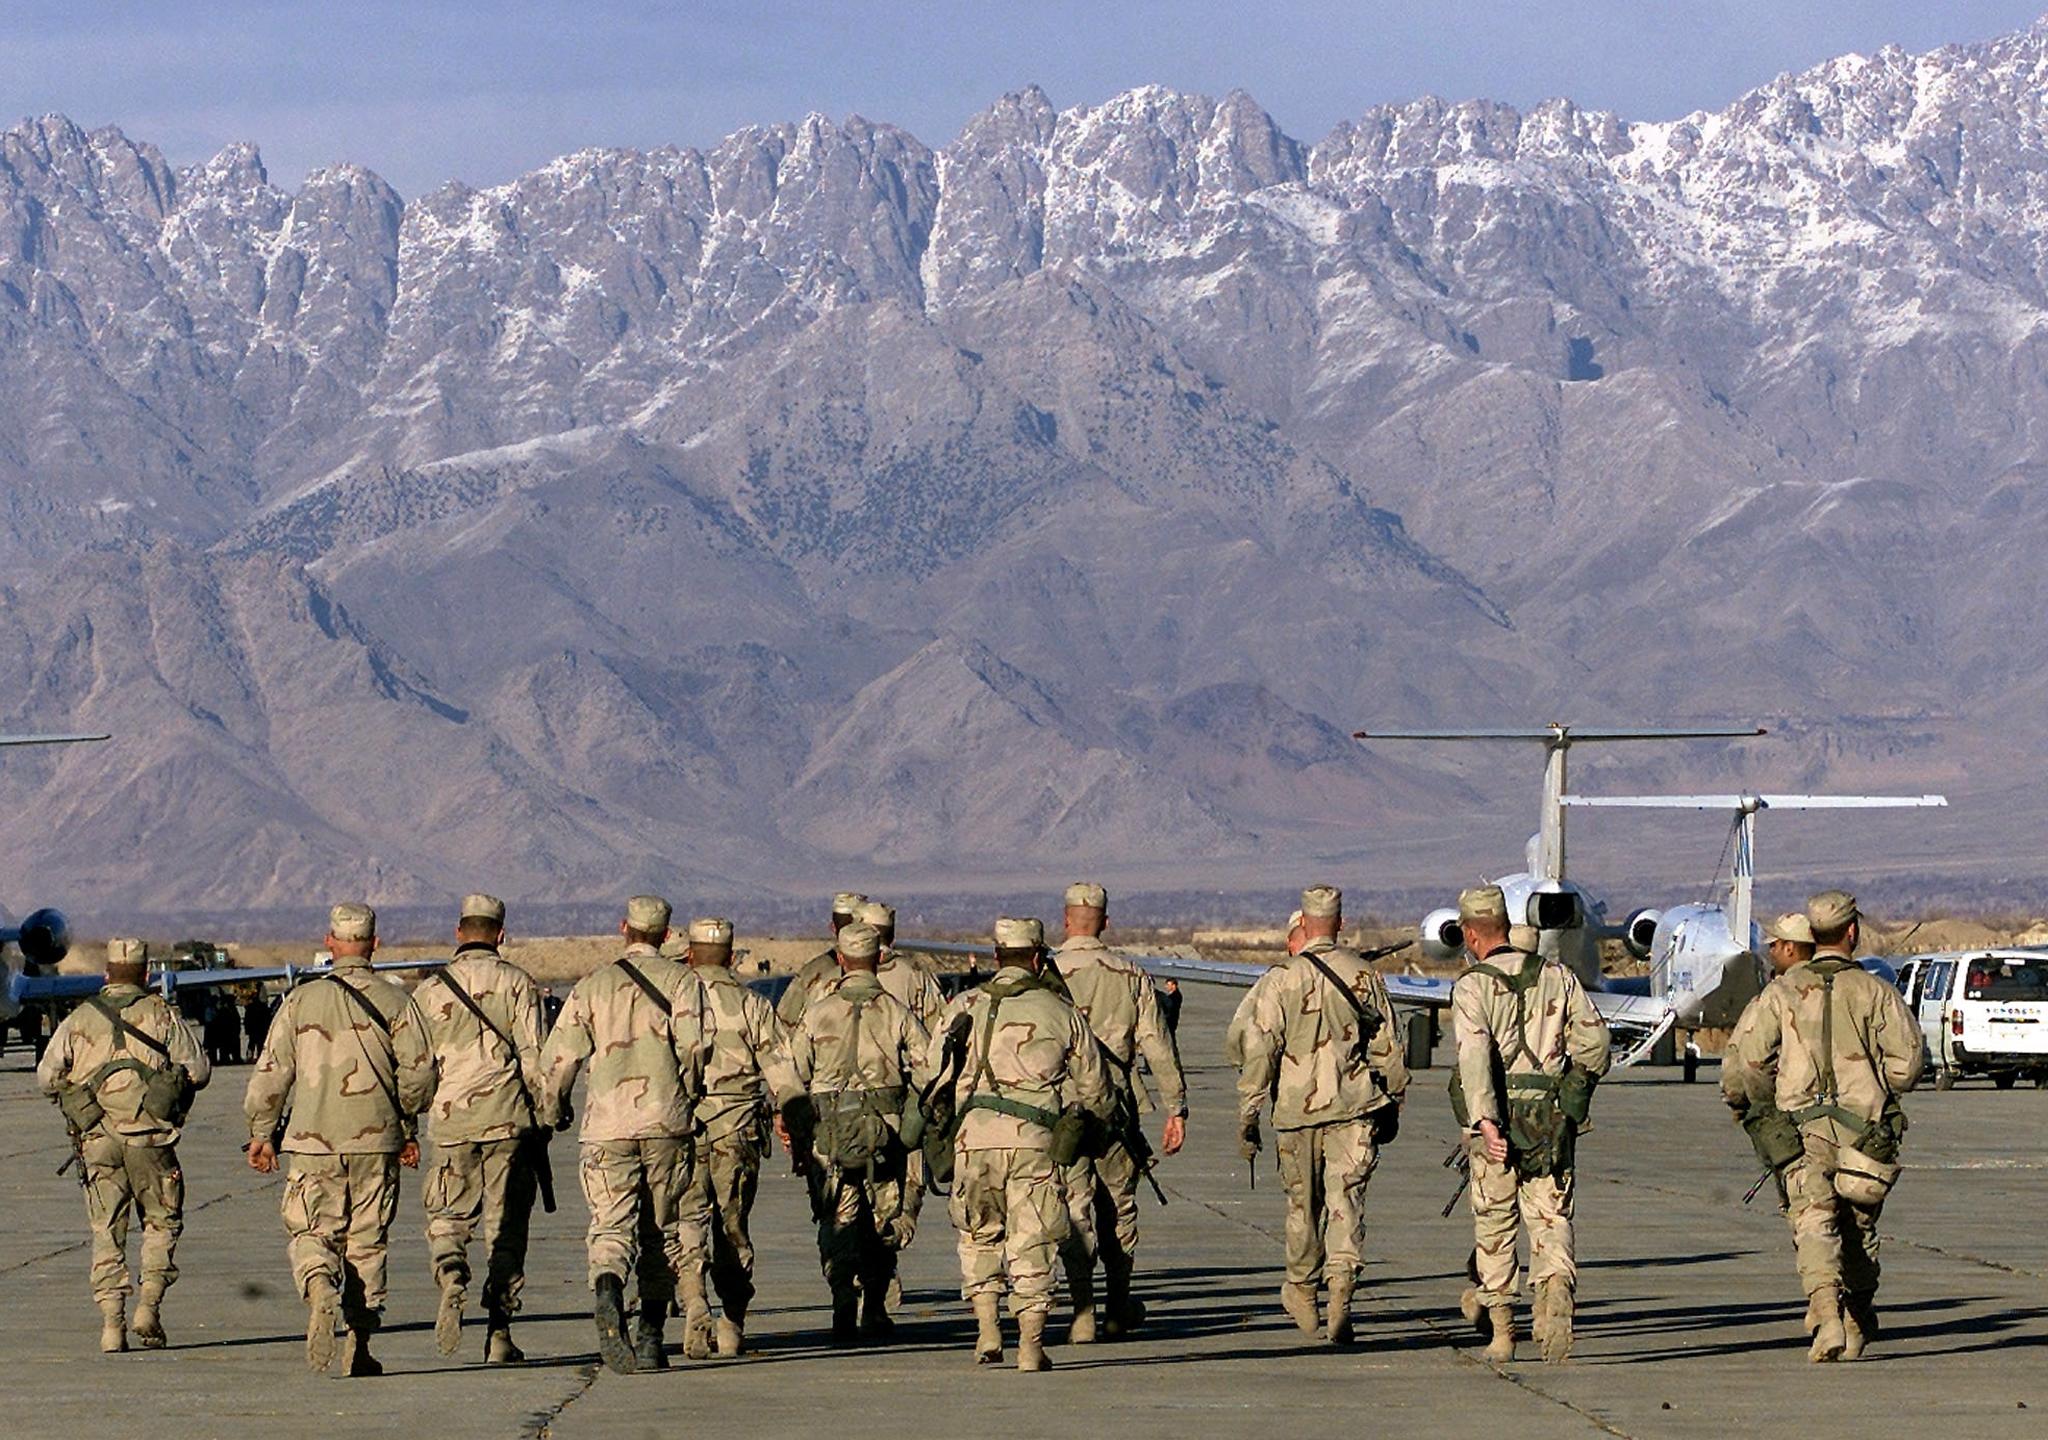 American soldiers approach UN planes on the tarmac of Bagram airbase on 15 January 2002 in this file photo